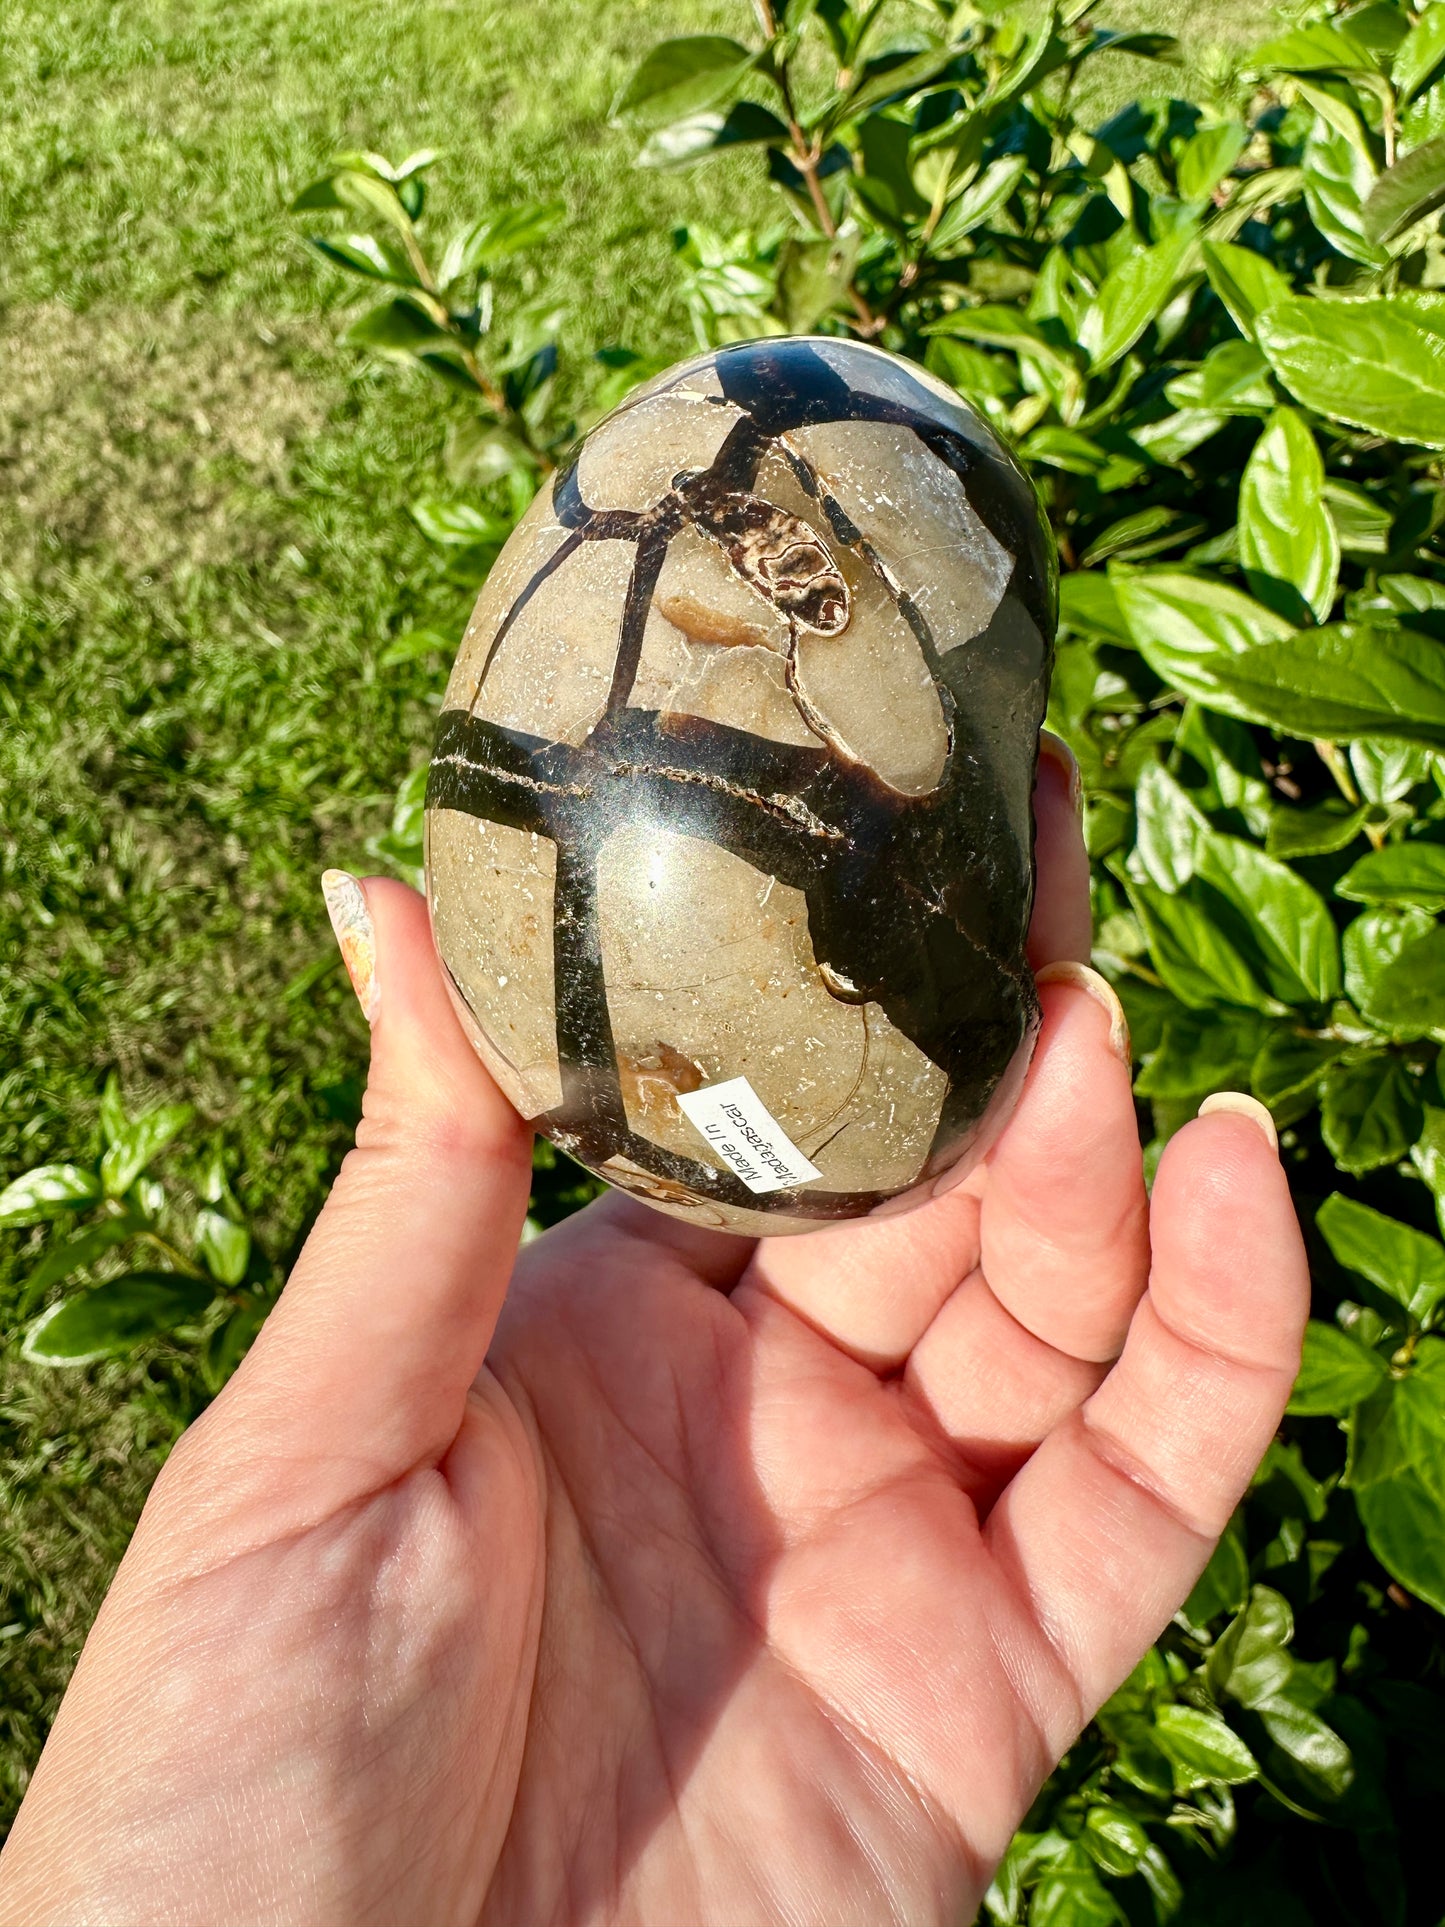 Septarian Druzy Egg: Striking Natural Geode Egg with Crystalline Center, Perfect Home Decor or Gift for Collectors and Geology Enthusiasts